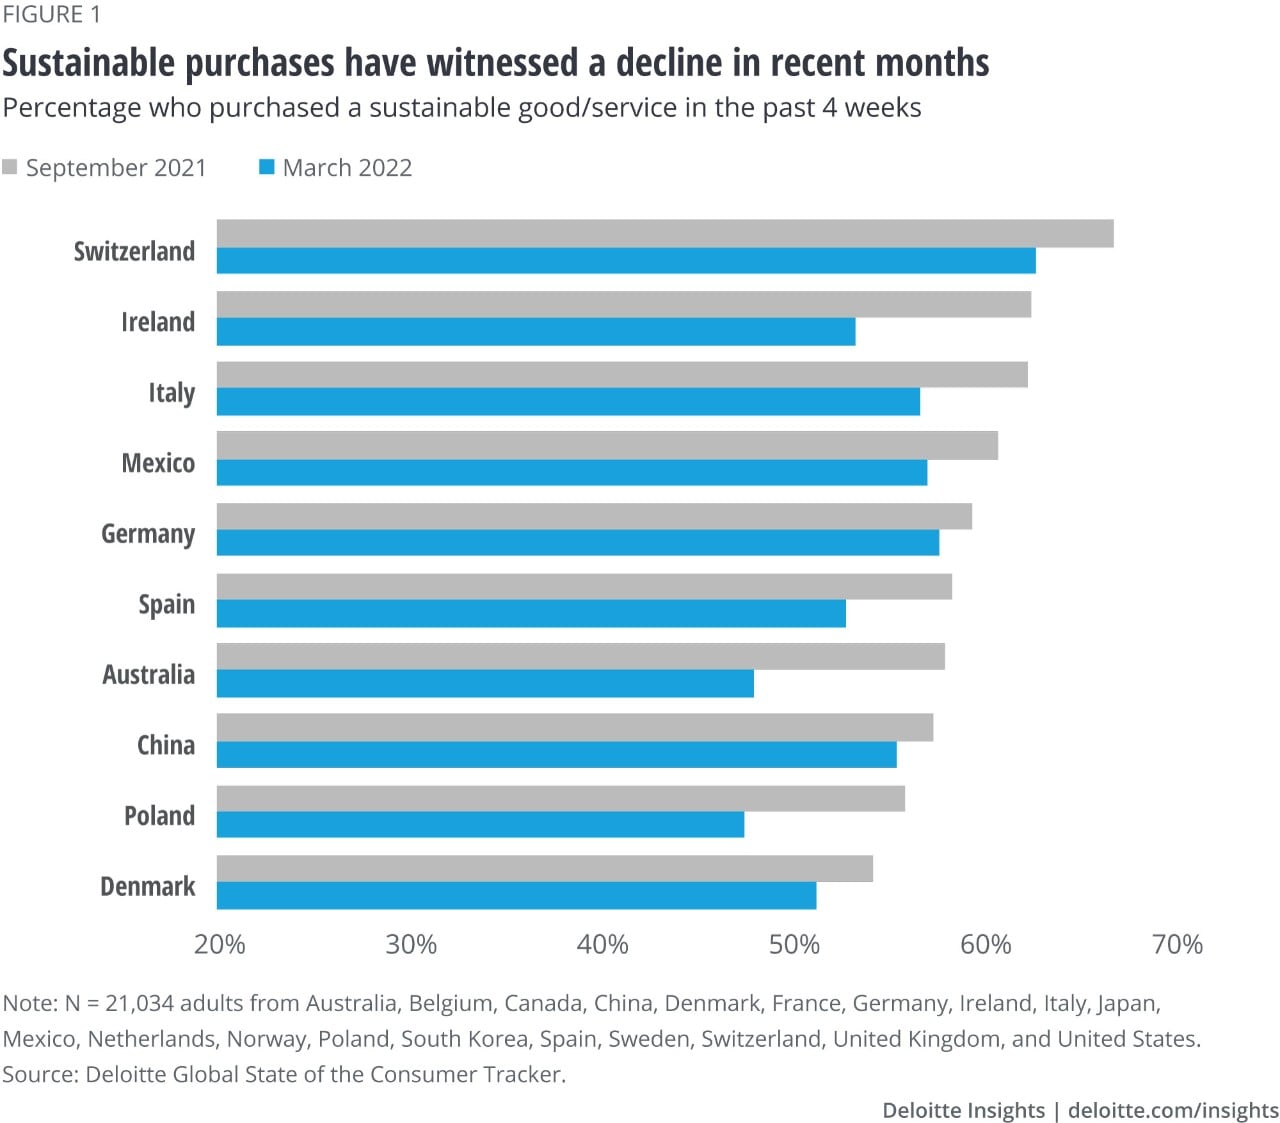 Figure 1. Sustainable purchases have witnessed a decline in recent months